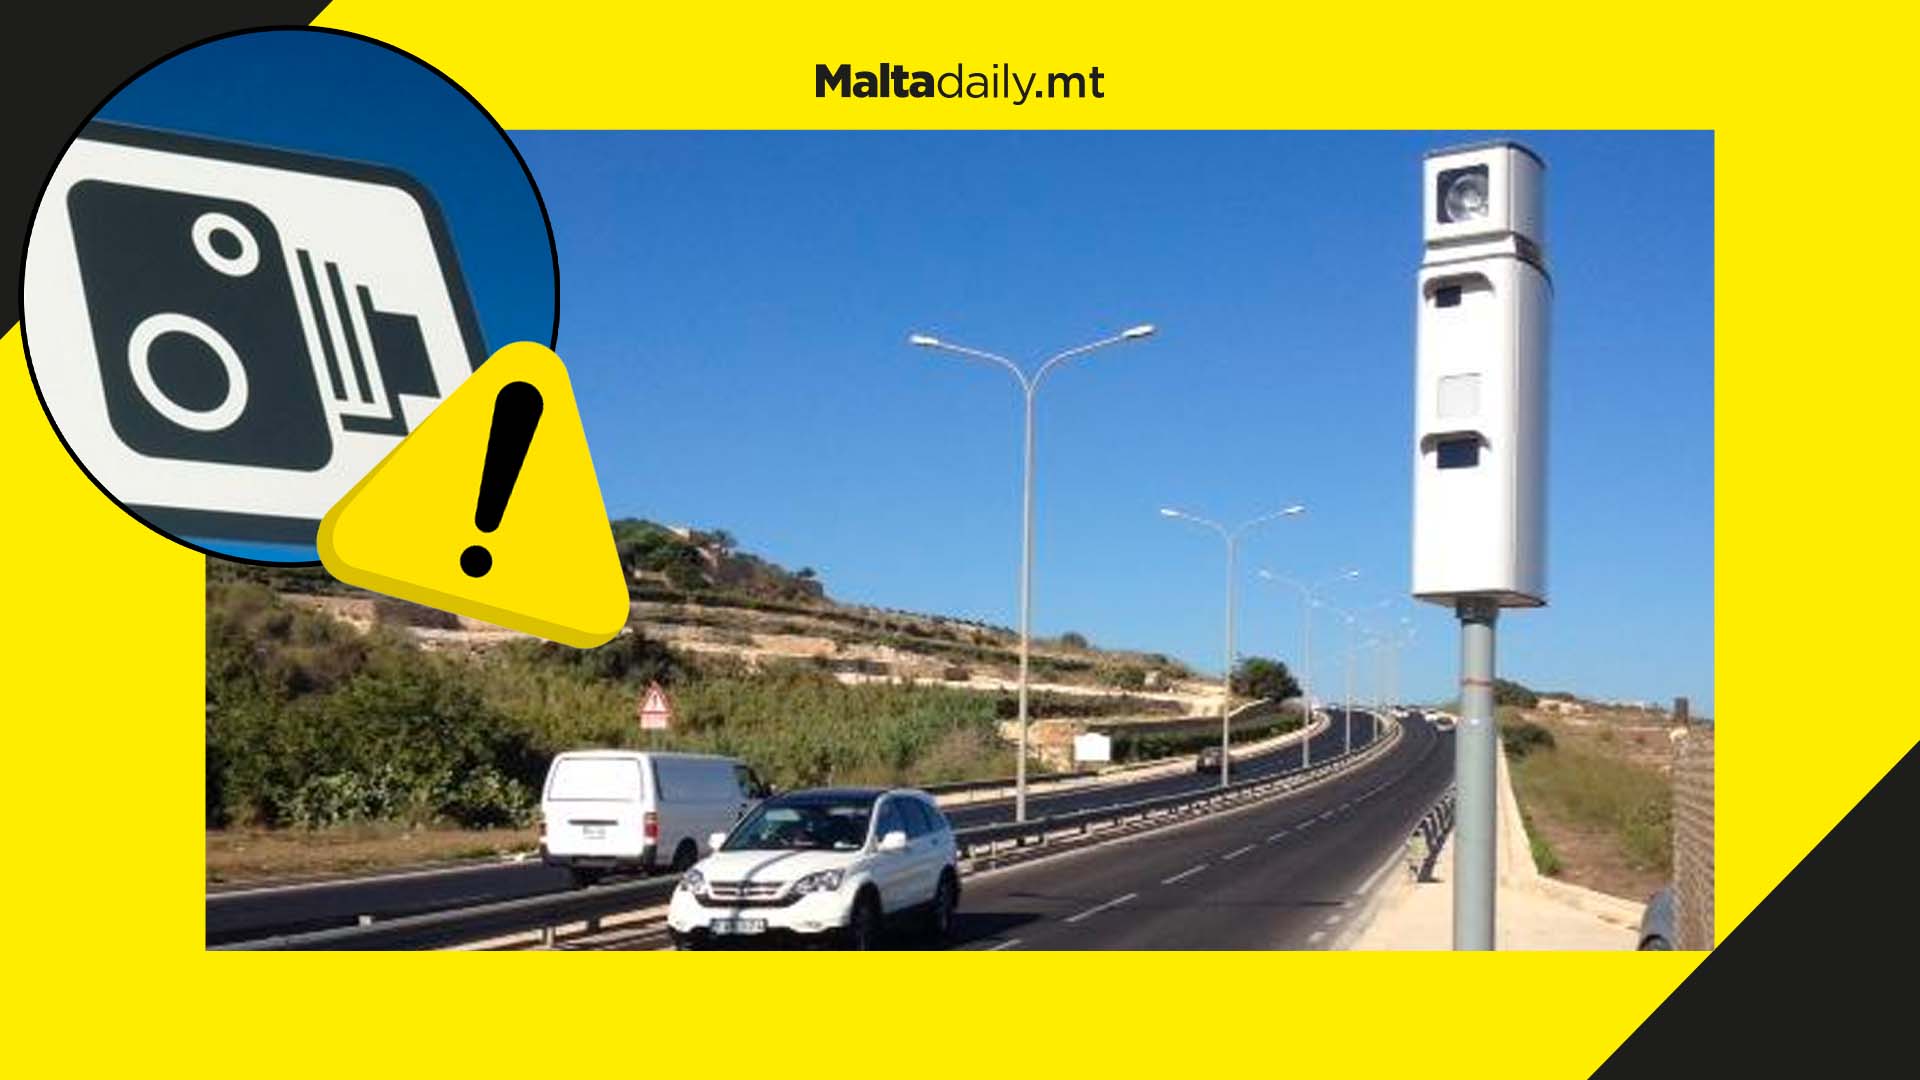 Two new speed cameras for Malta’s Coast Road